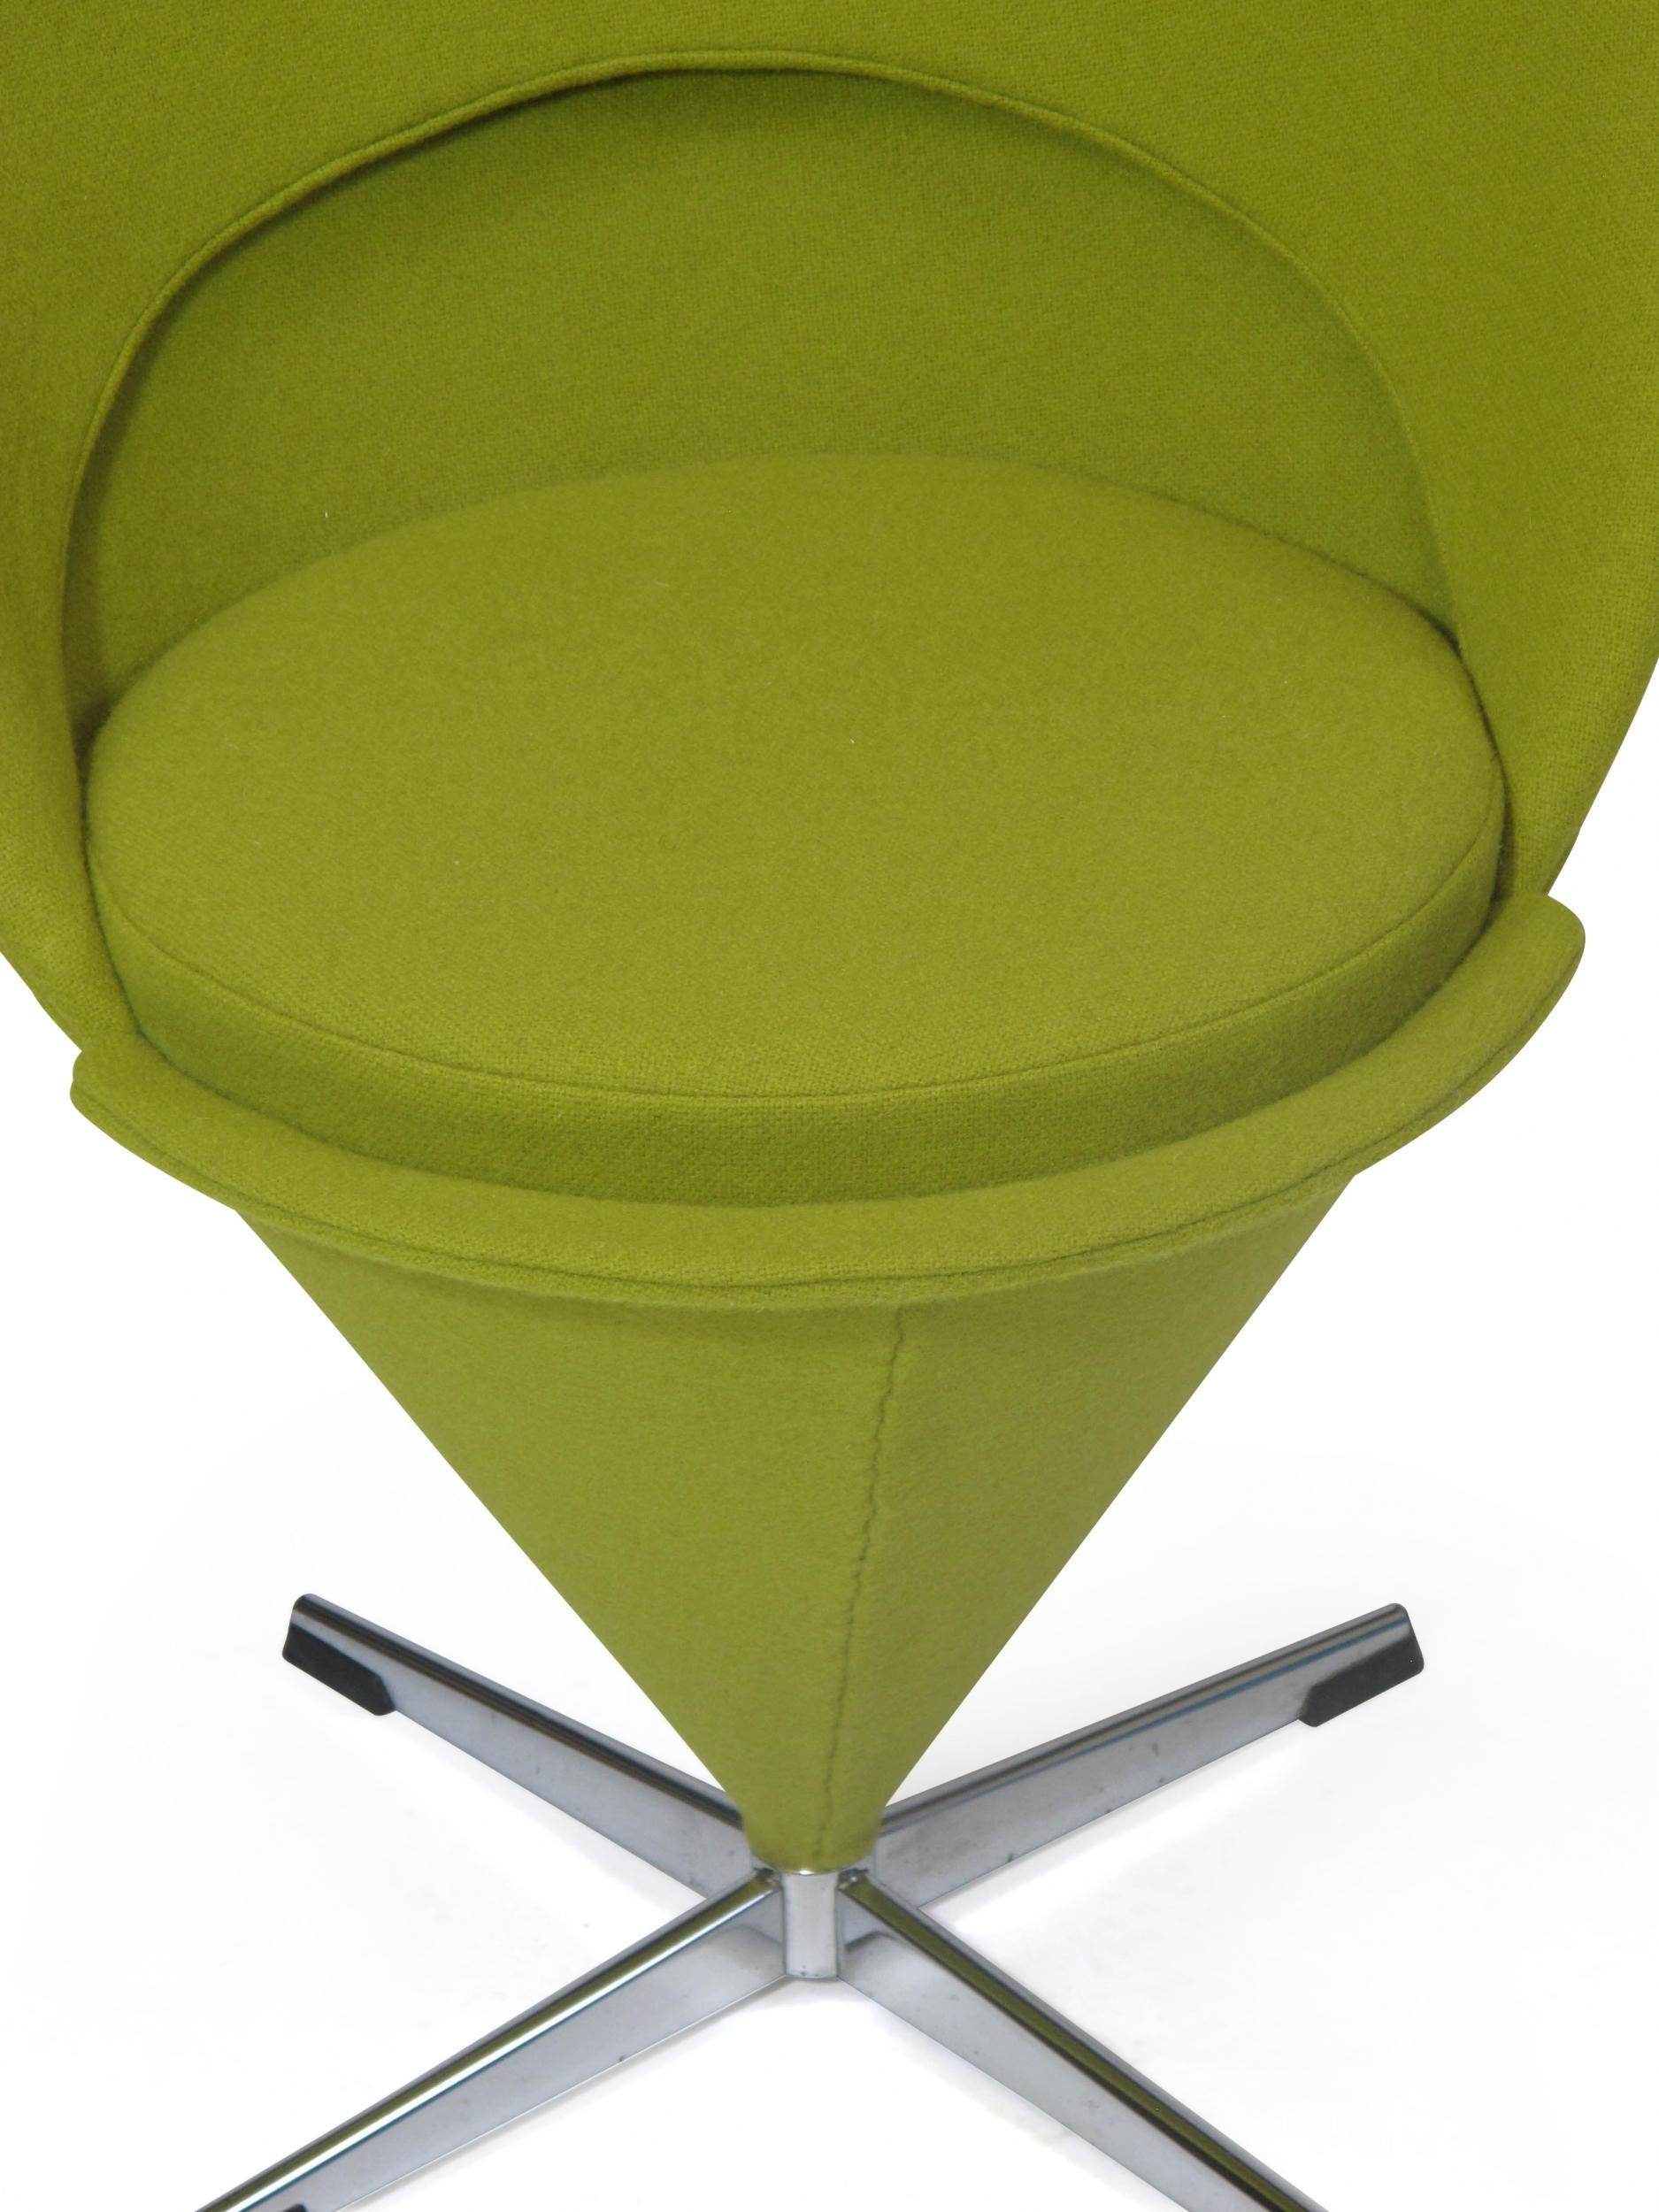 20th Century Verner Panton Cone Chair For Sale